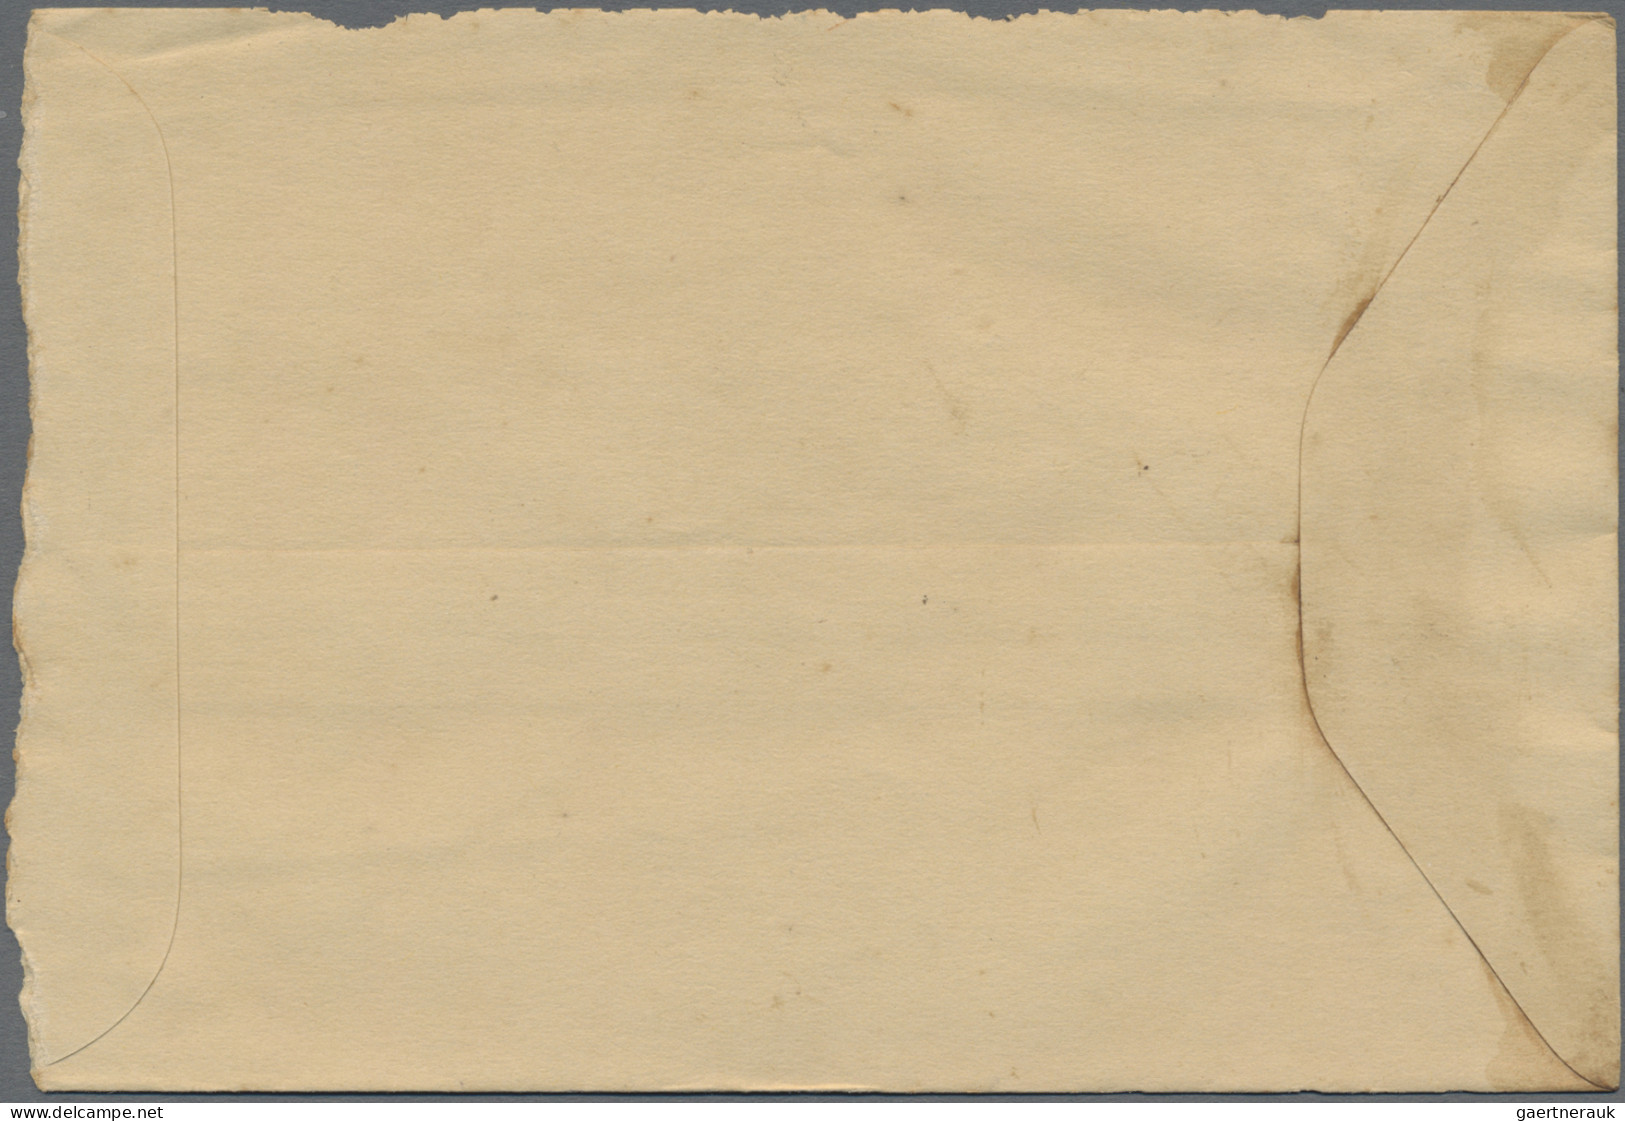 Thailand - Postal Stationery: 1941 Postal Stationery Envelope 10s. Red Used From - Thailand